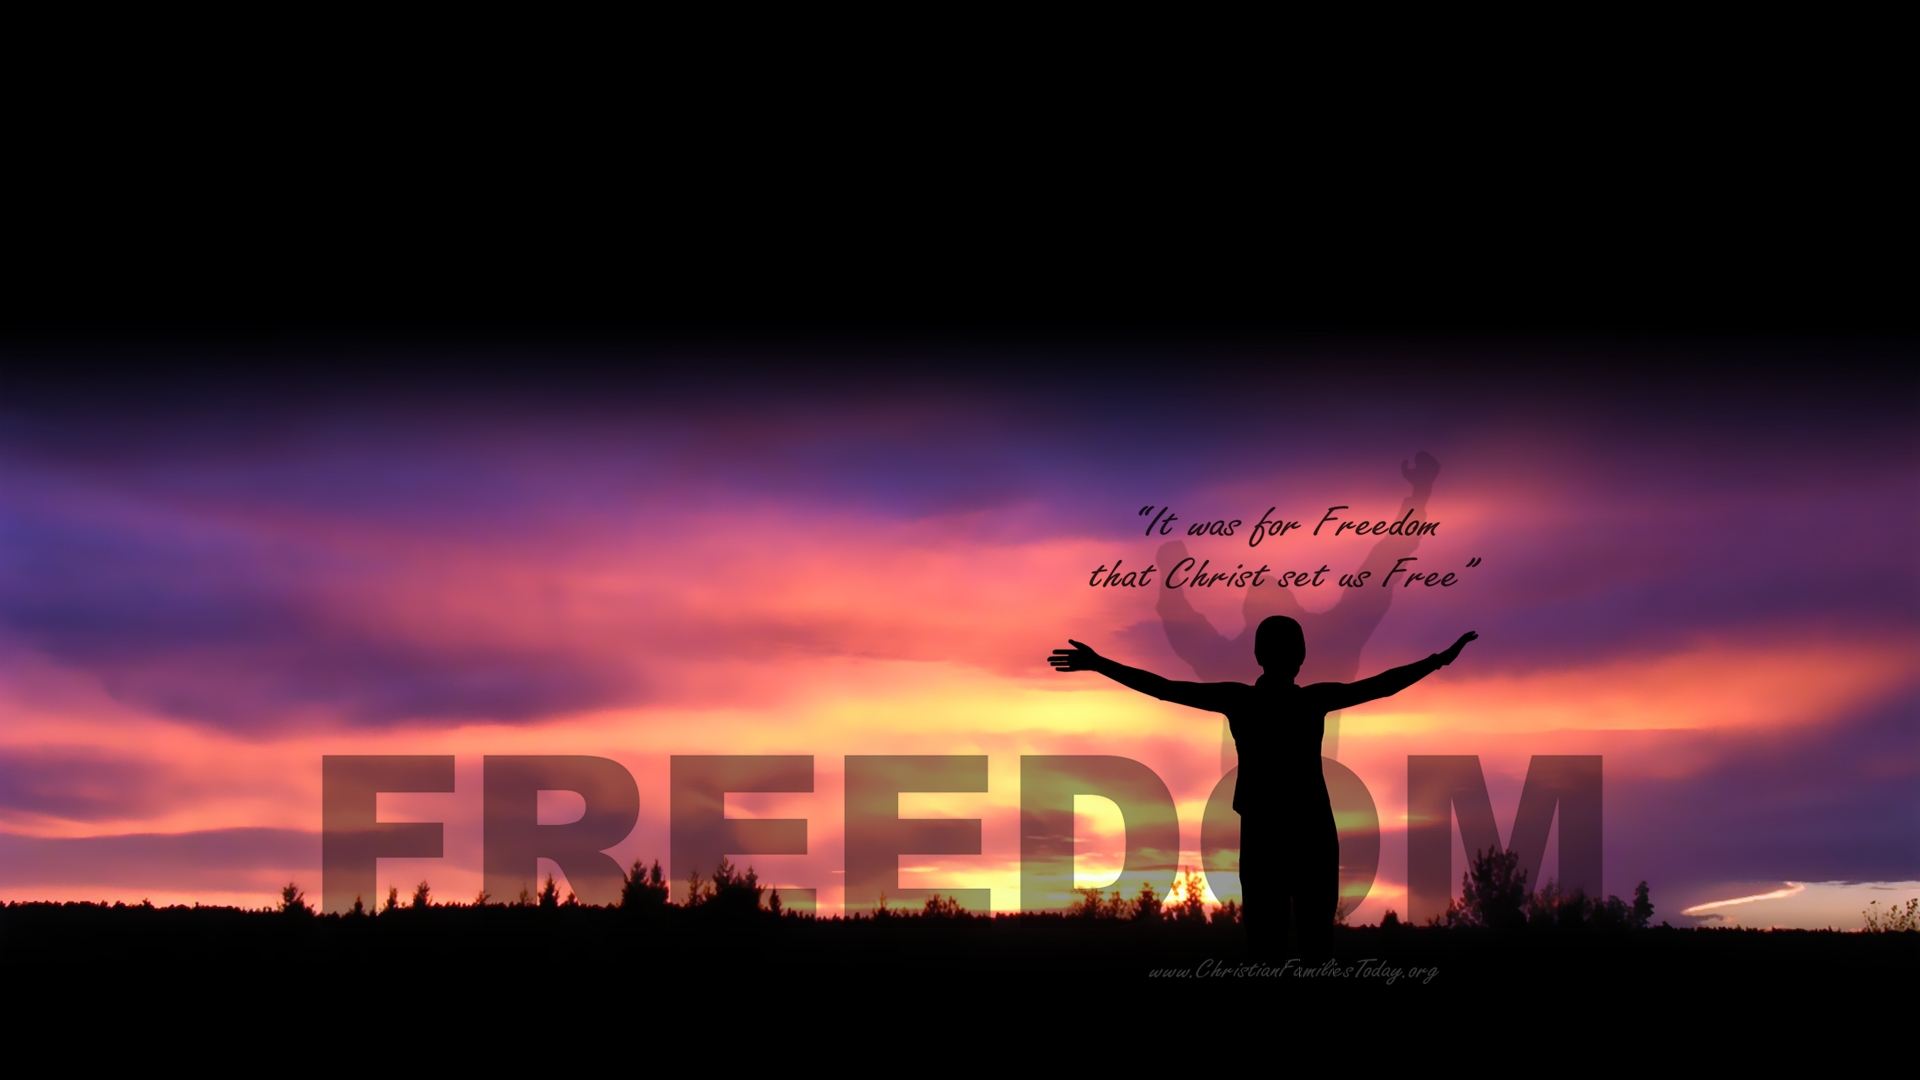 Freedom Wallpaper   Christian Wallpapers and Backgrounds 1920x1080